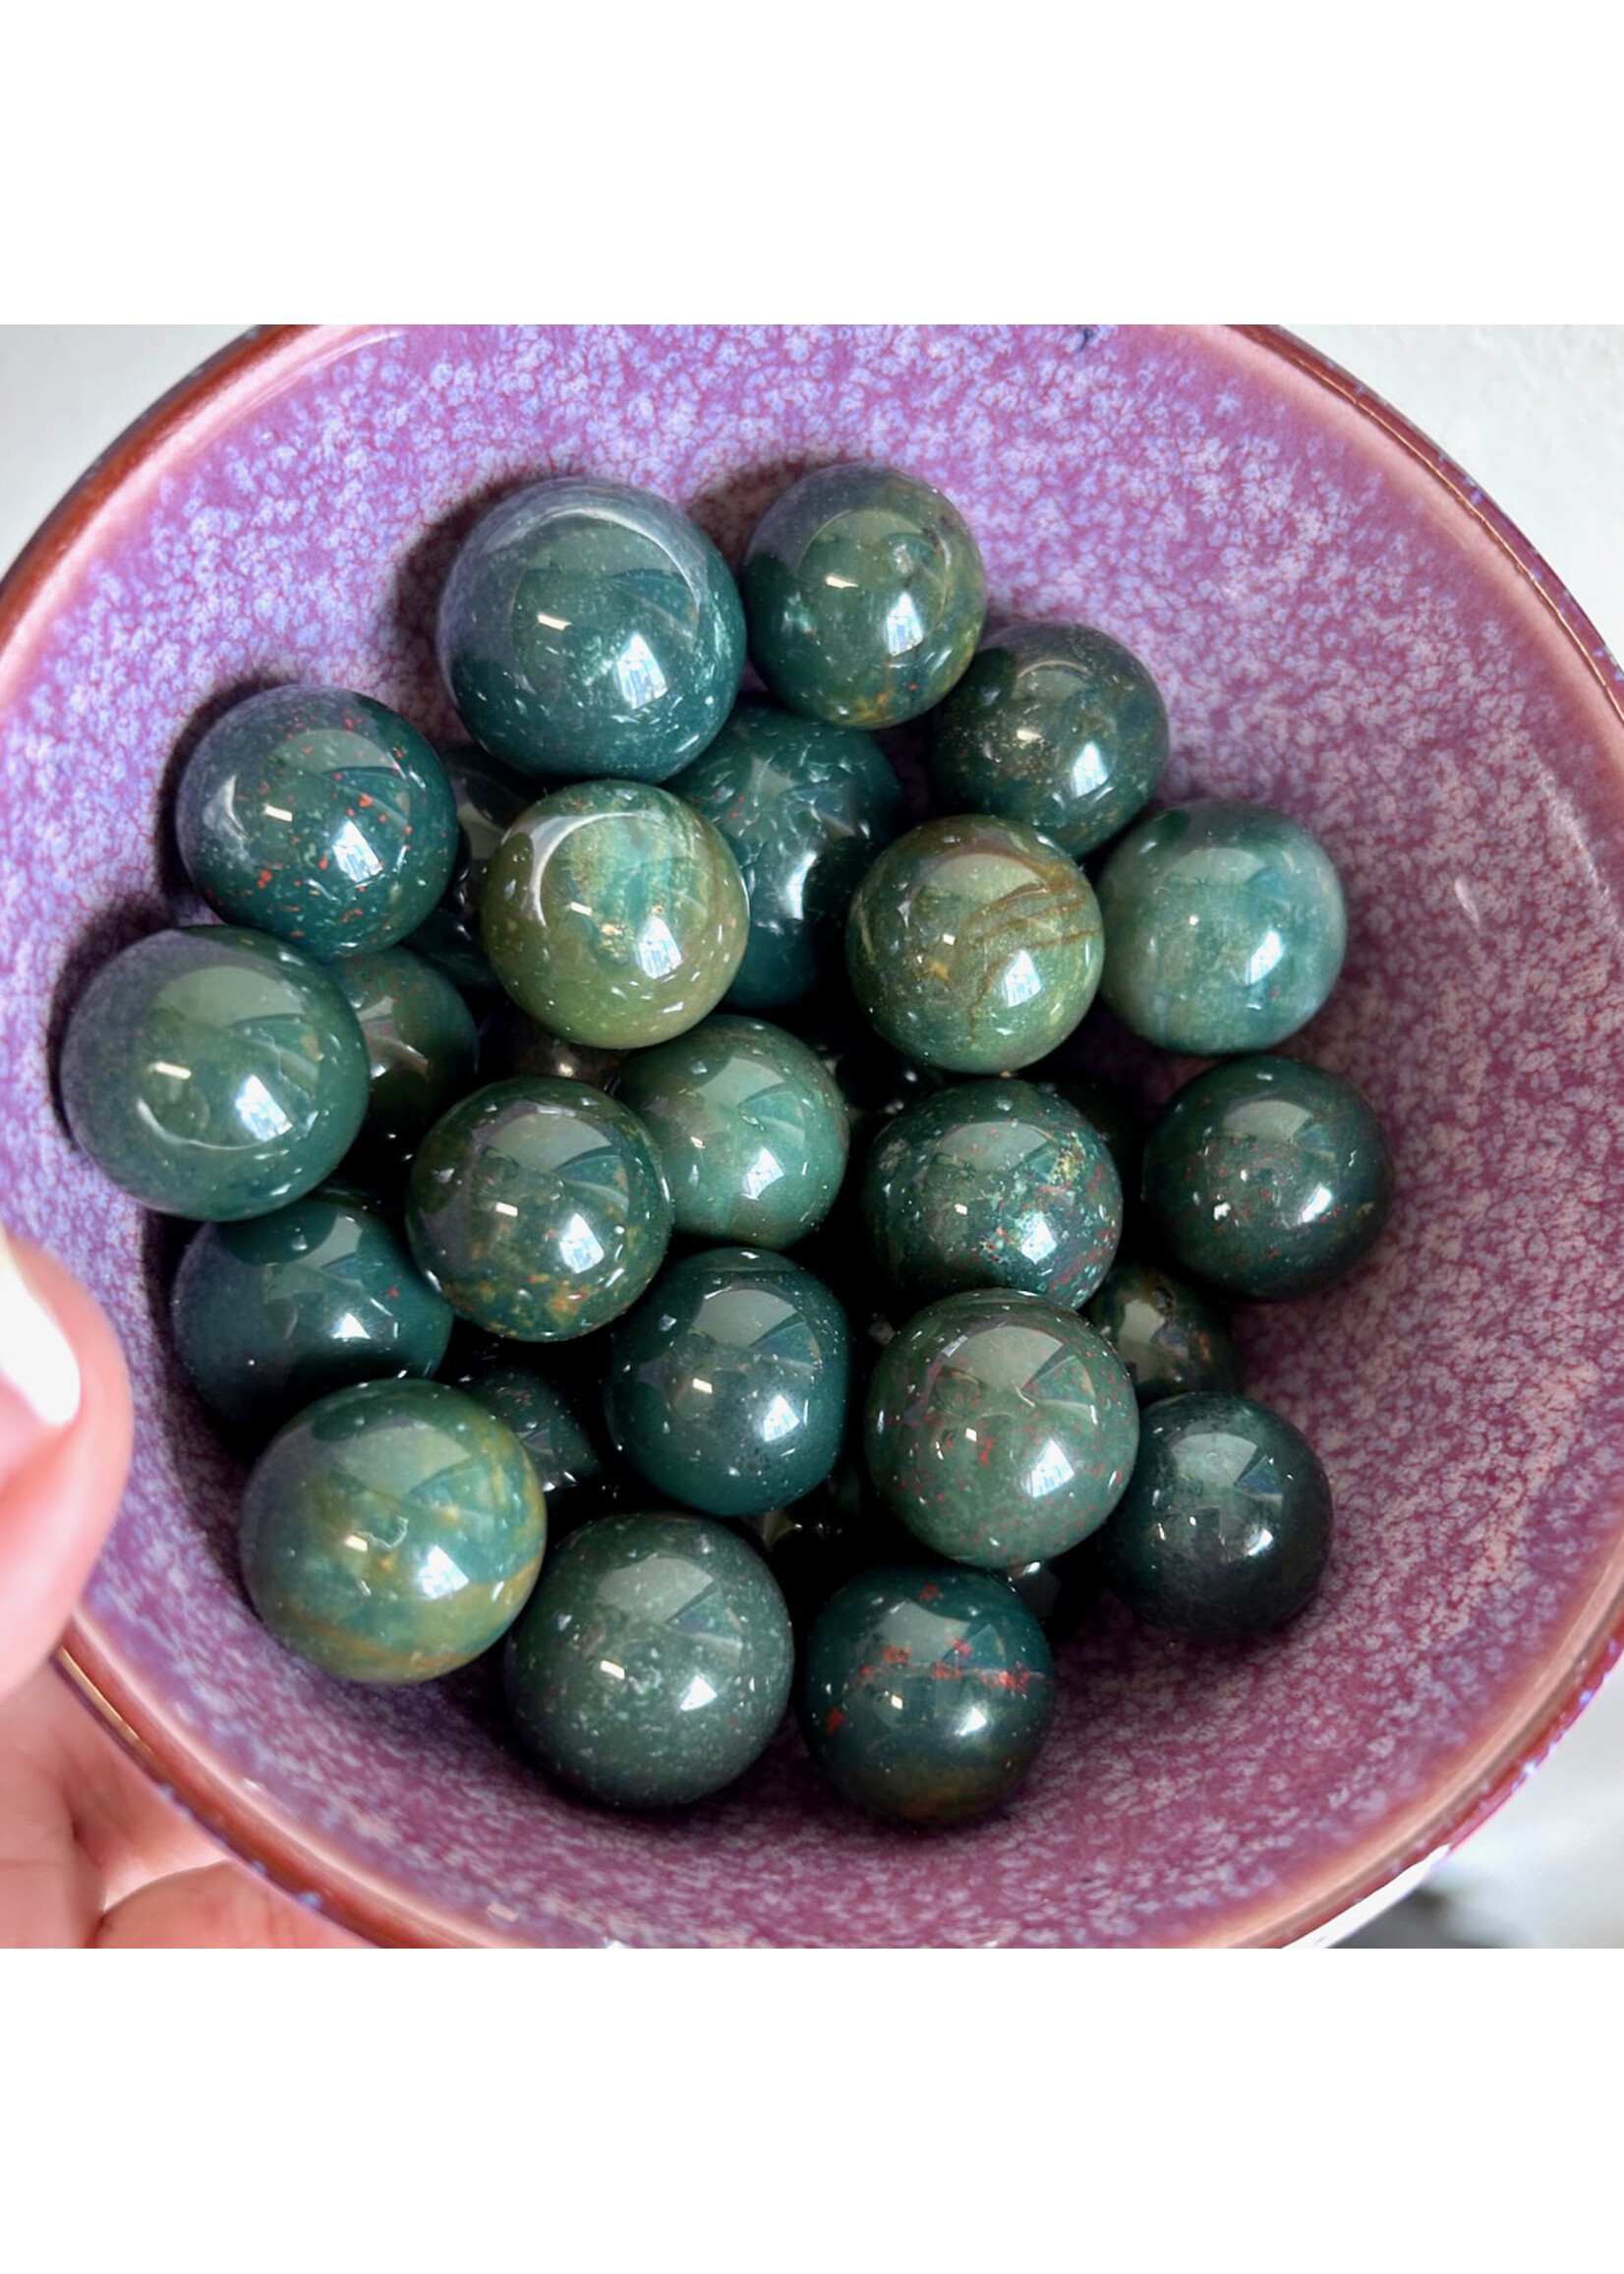 Bloodstone Mini Spheres for well-being